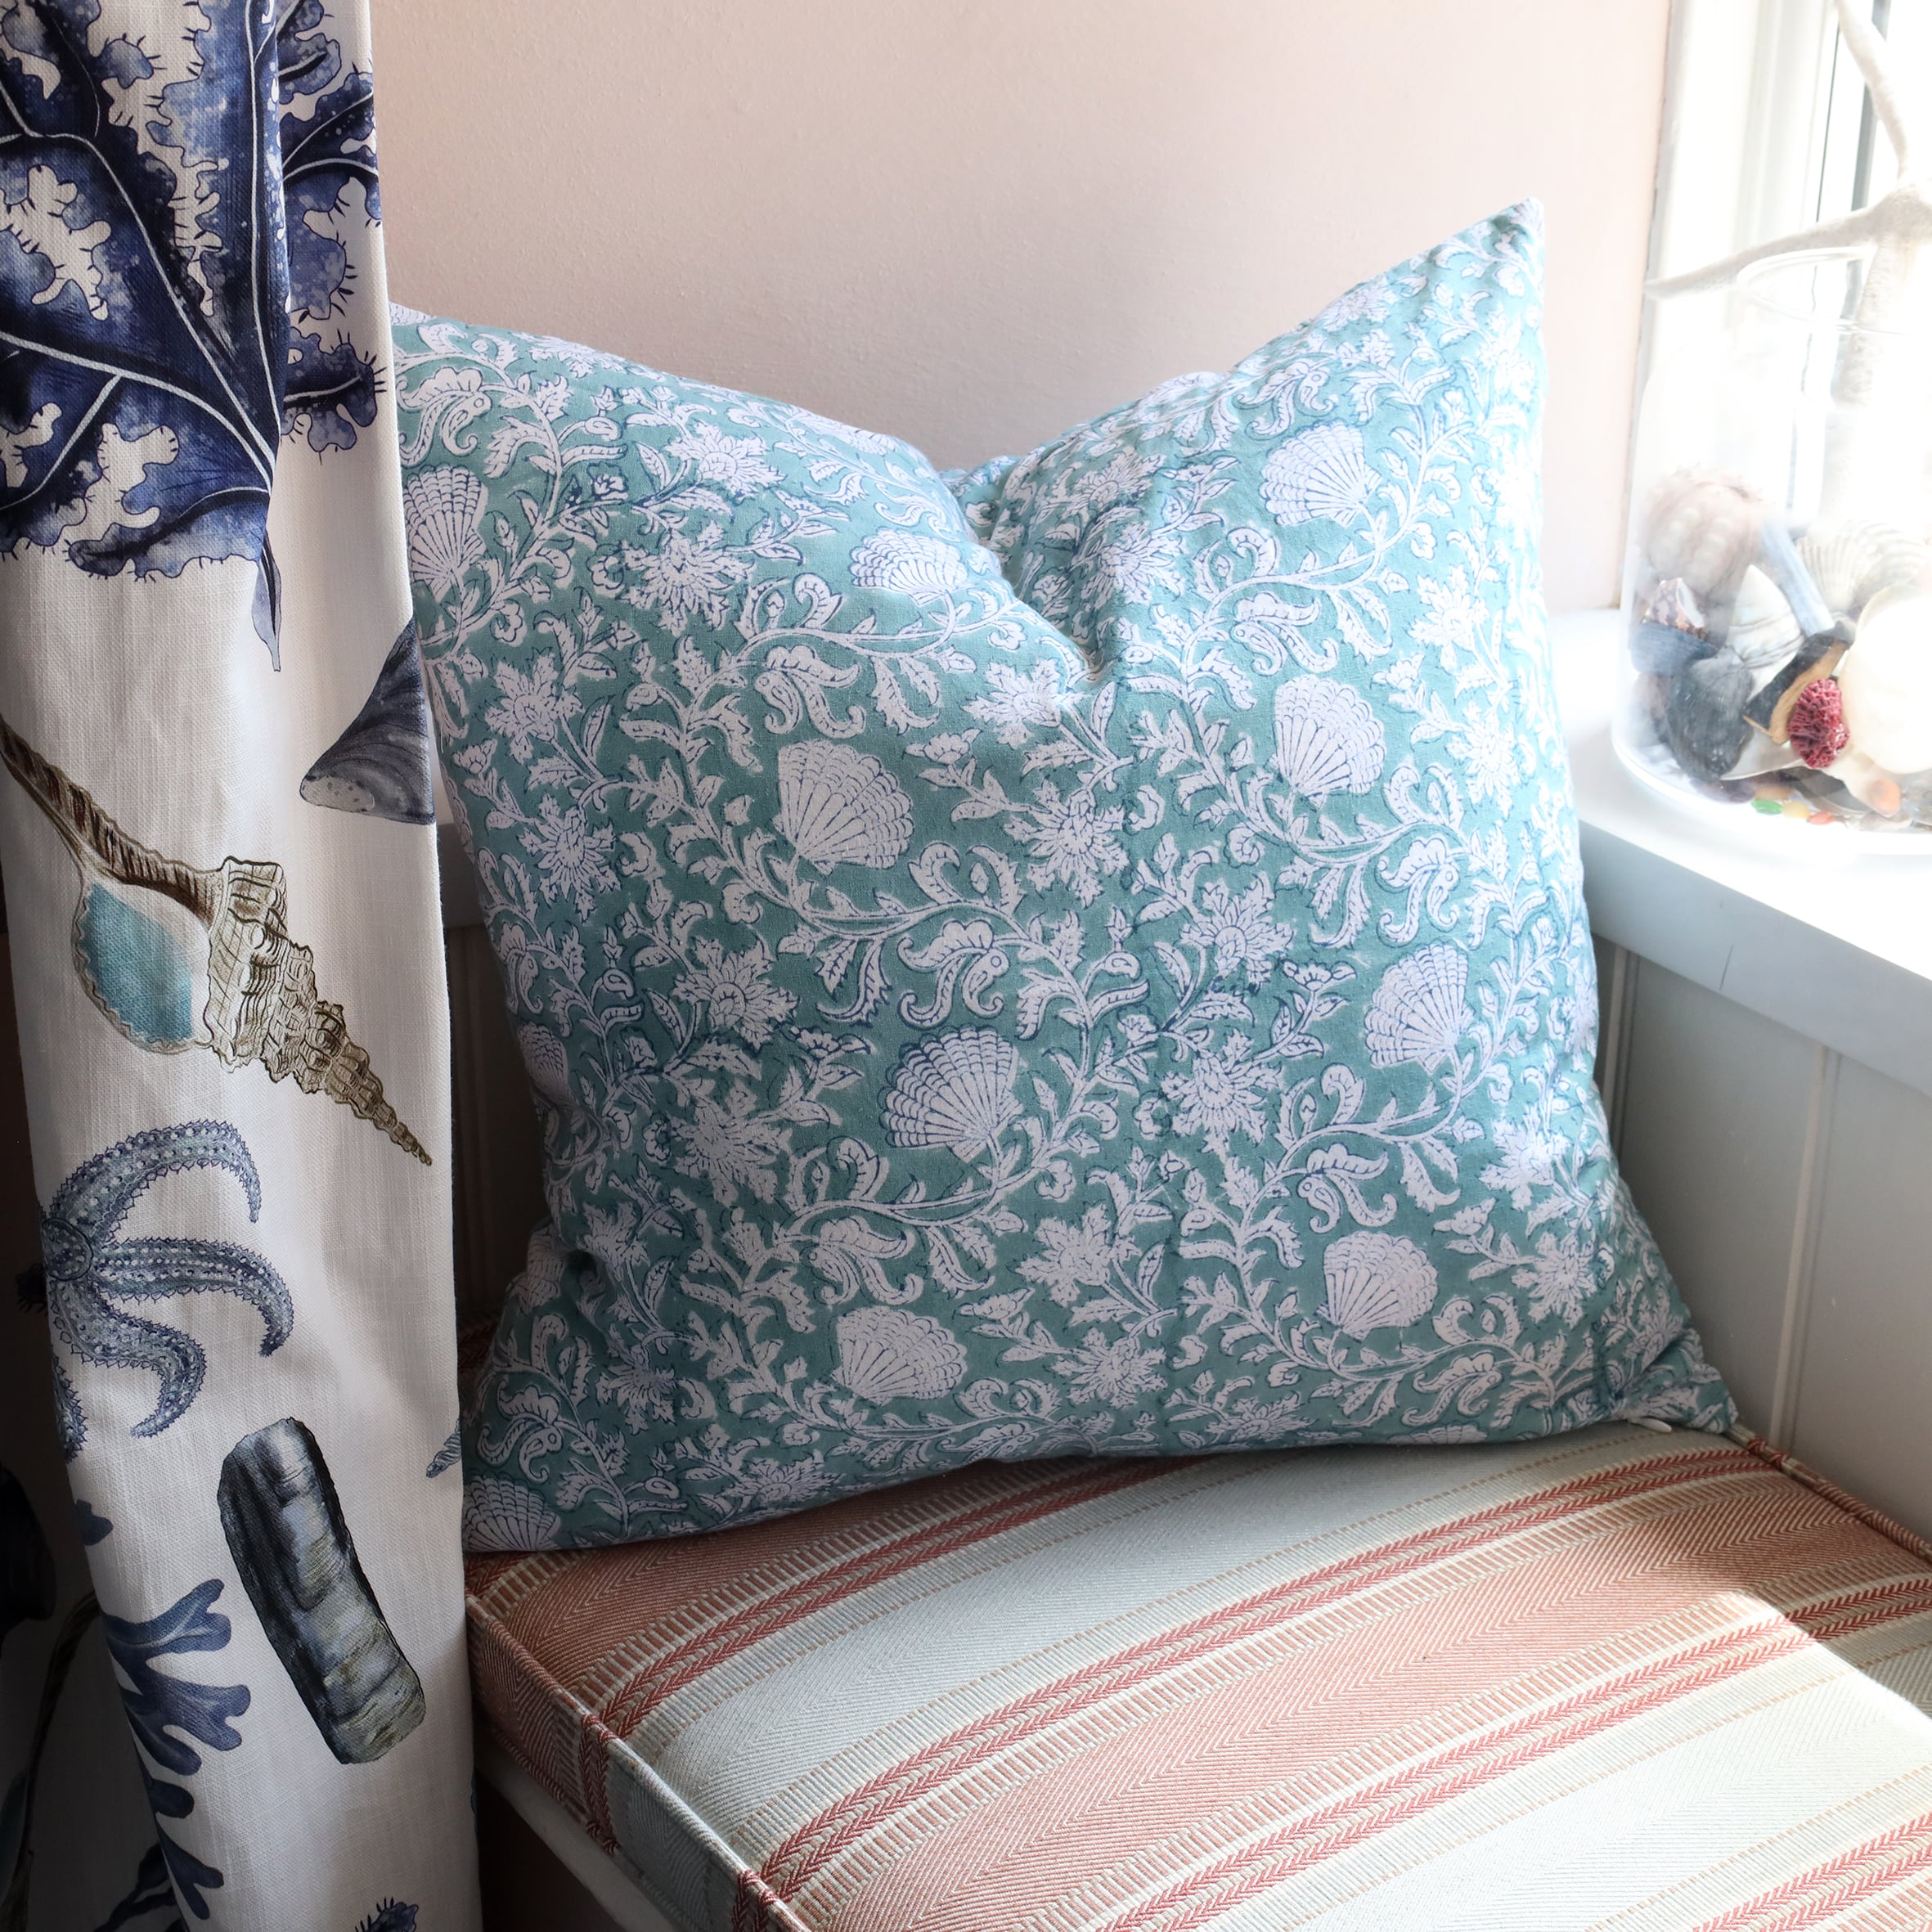 Sea Breeze Seashell Flower cushion which is Hand block printed fabric in a turquoise blue .Cushion is on a window seat setting with a curtain made in our Rockpool fabric and a jar of shells on the window ledge.